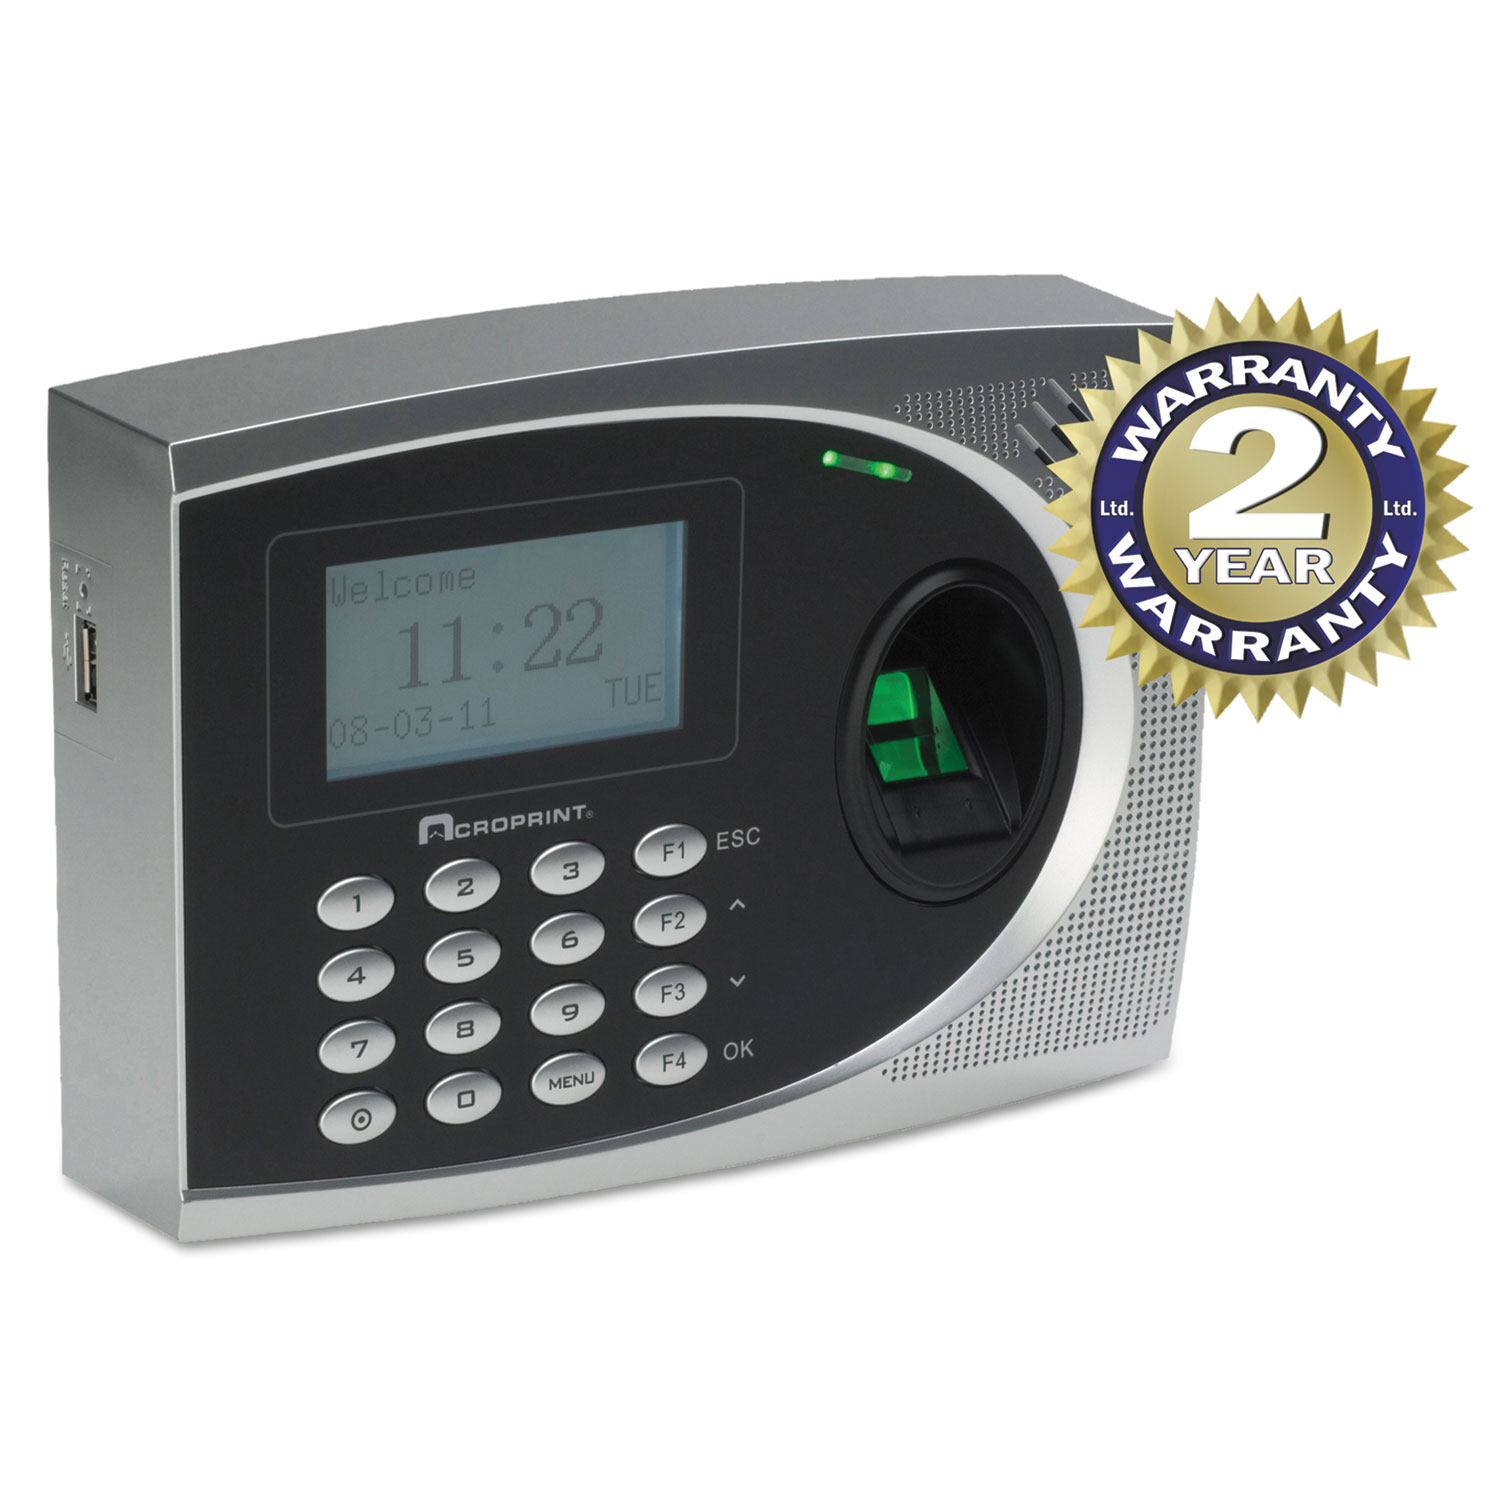  Acroprint 01-0250-000 timeQplus Biometric Time and Attendance System, Automated (ACP010250000) 